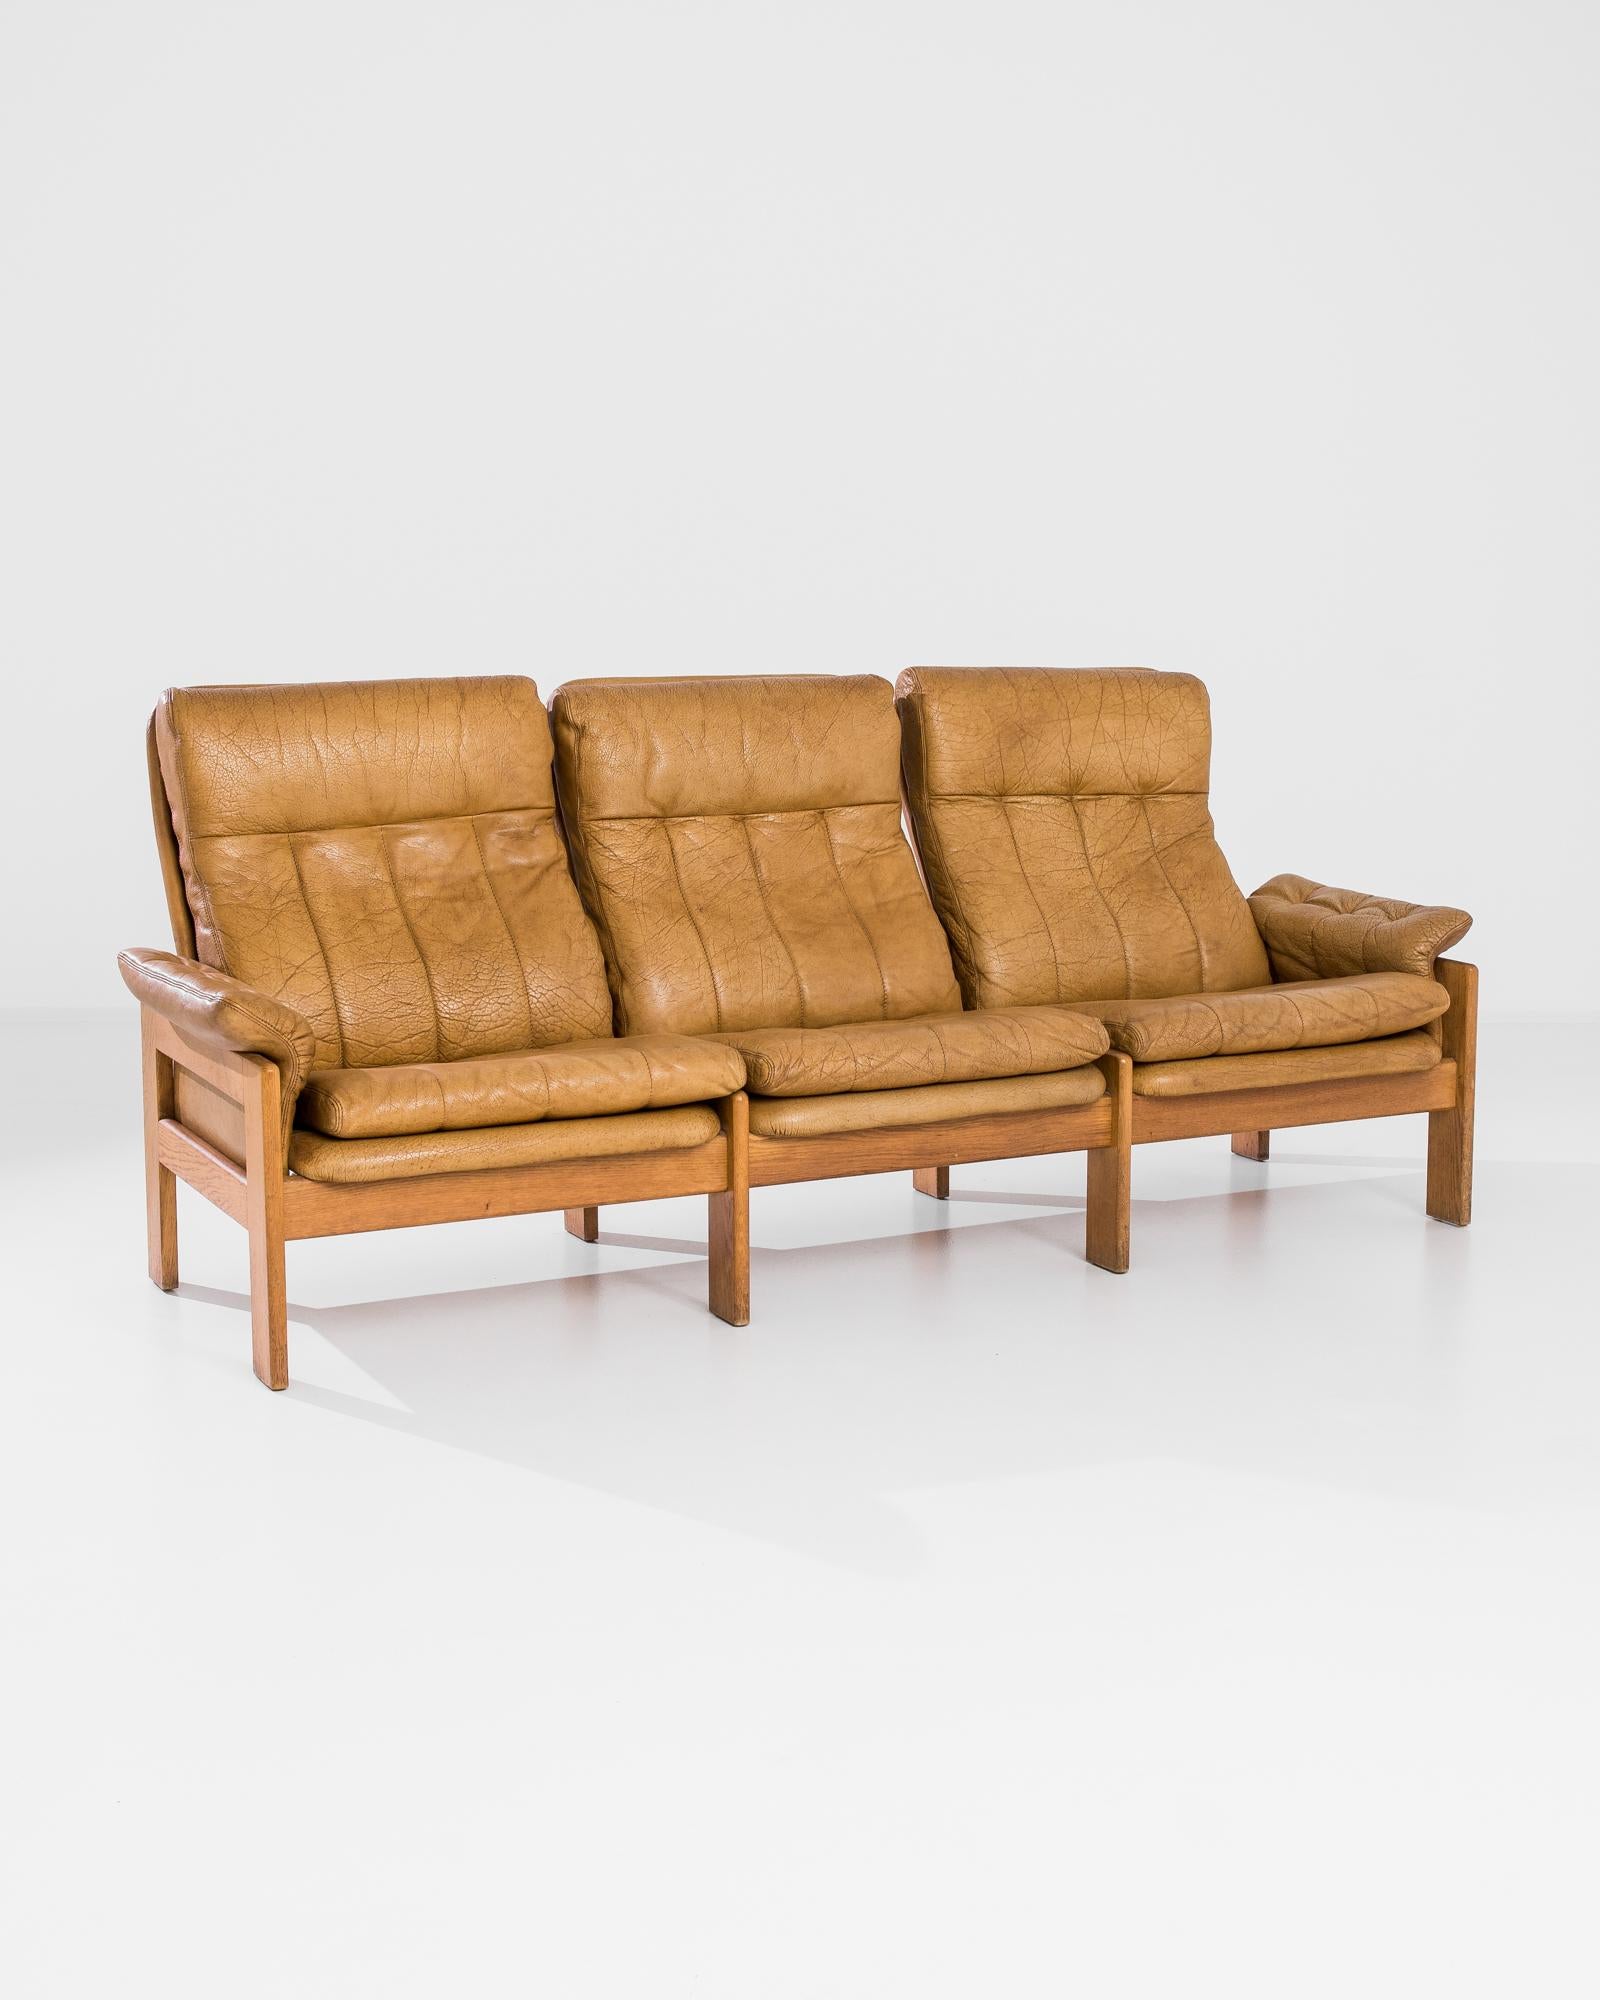 Mid-20th Century Danish Modern Sofa by Skippers Mobler